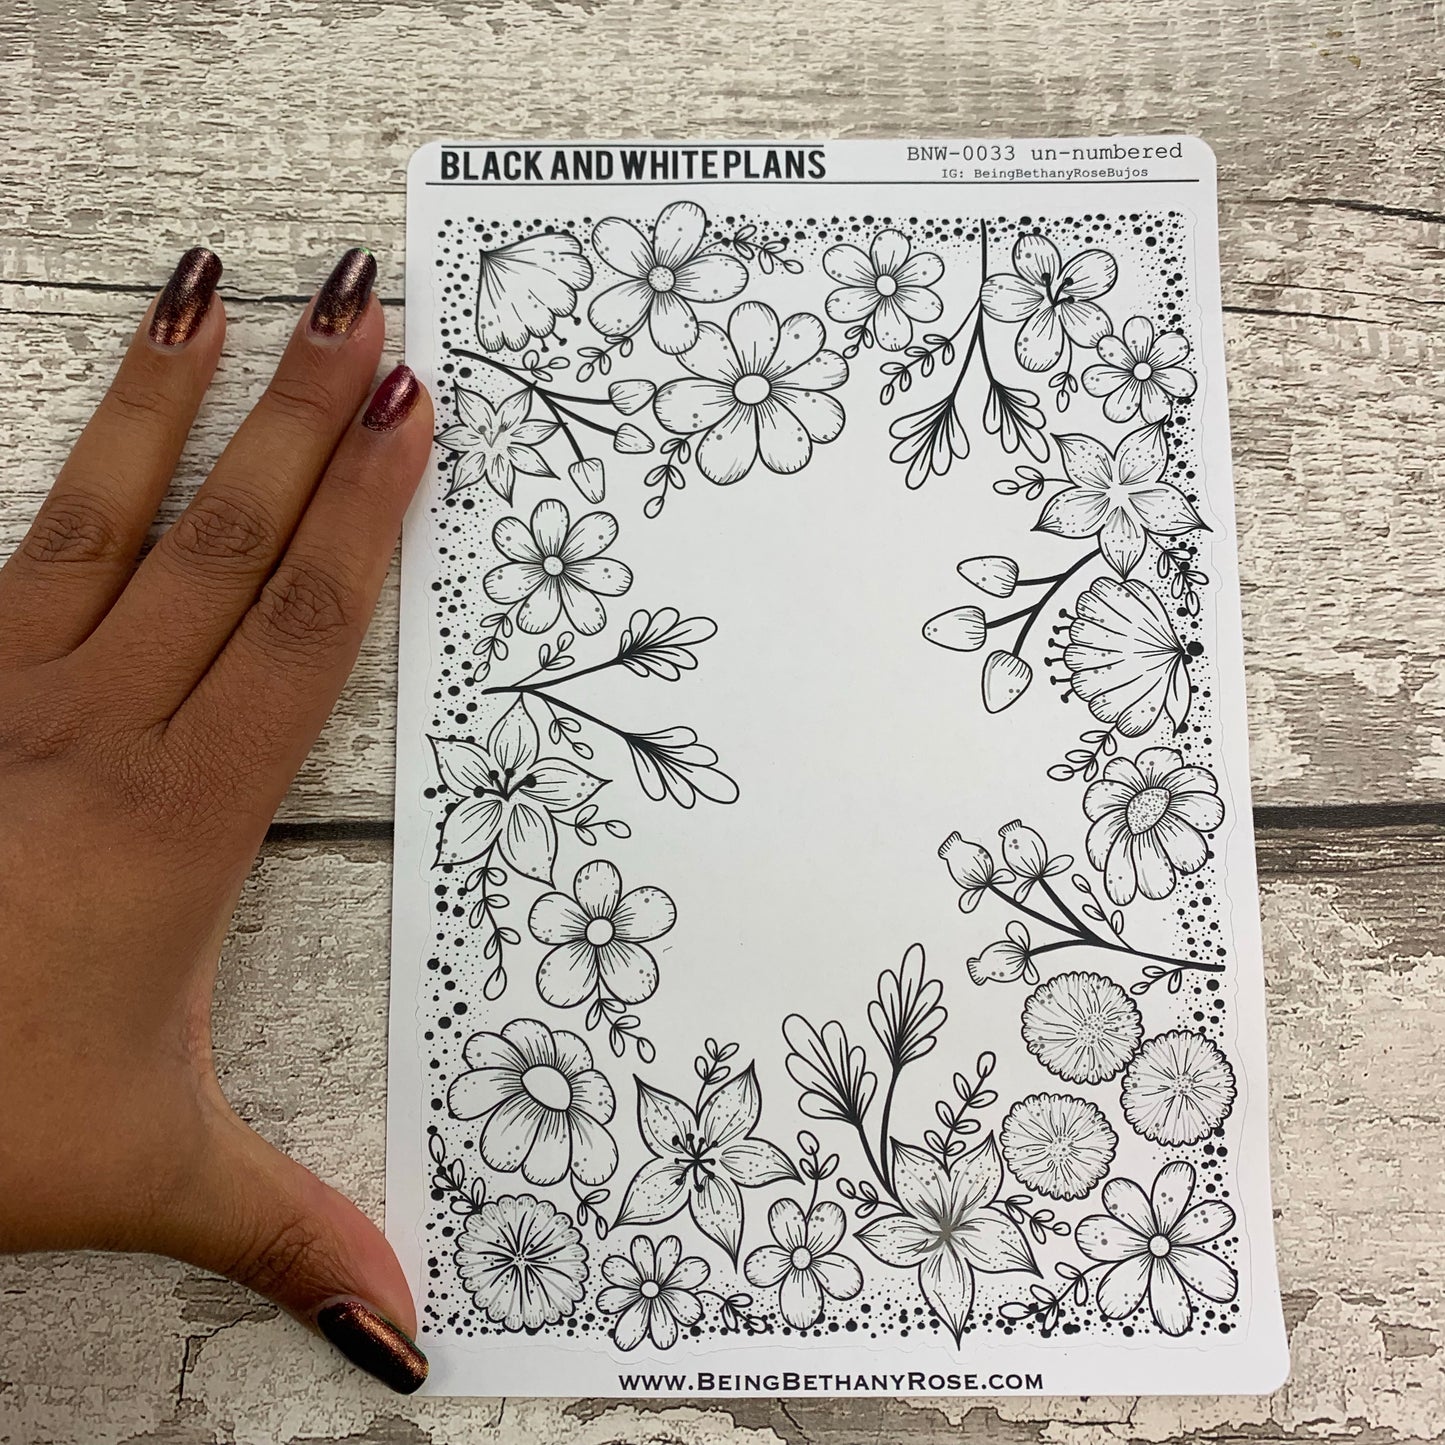 Bullet Journal Style Floral monthly tracker sticker (BNWP0033)